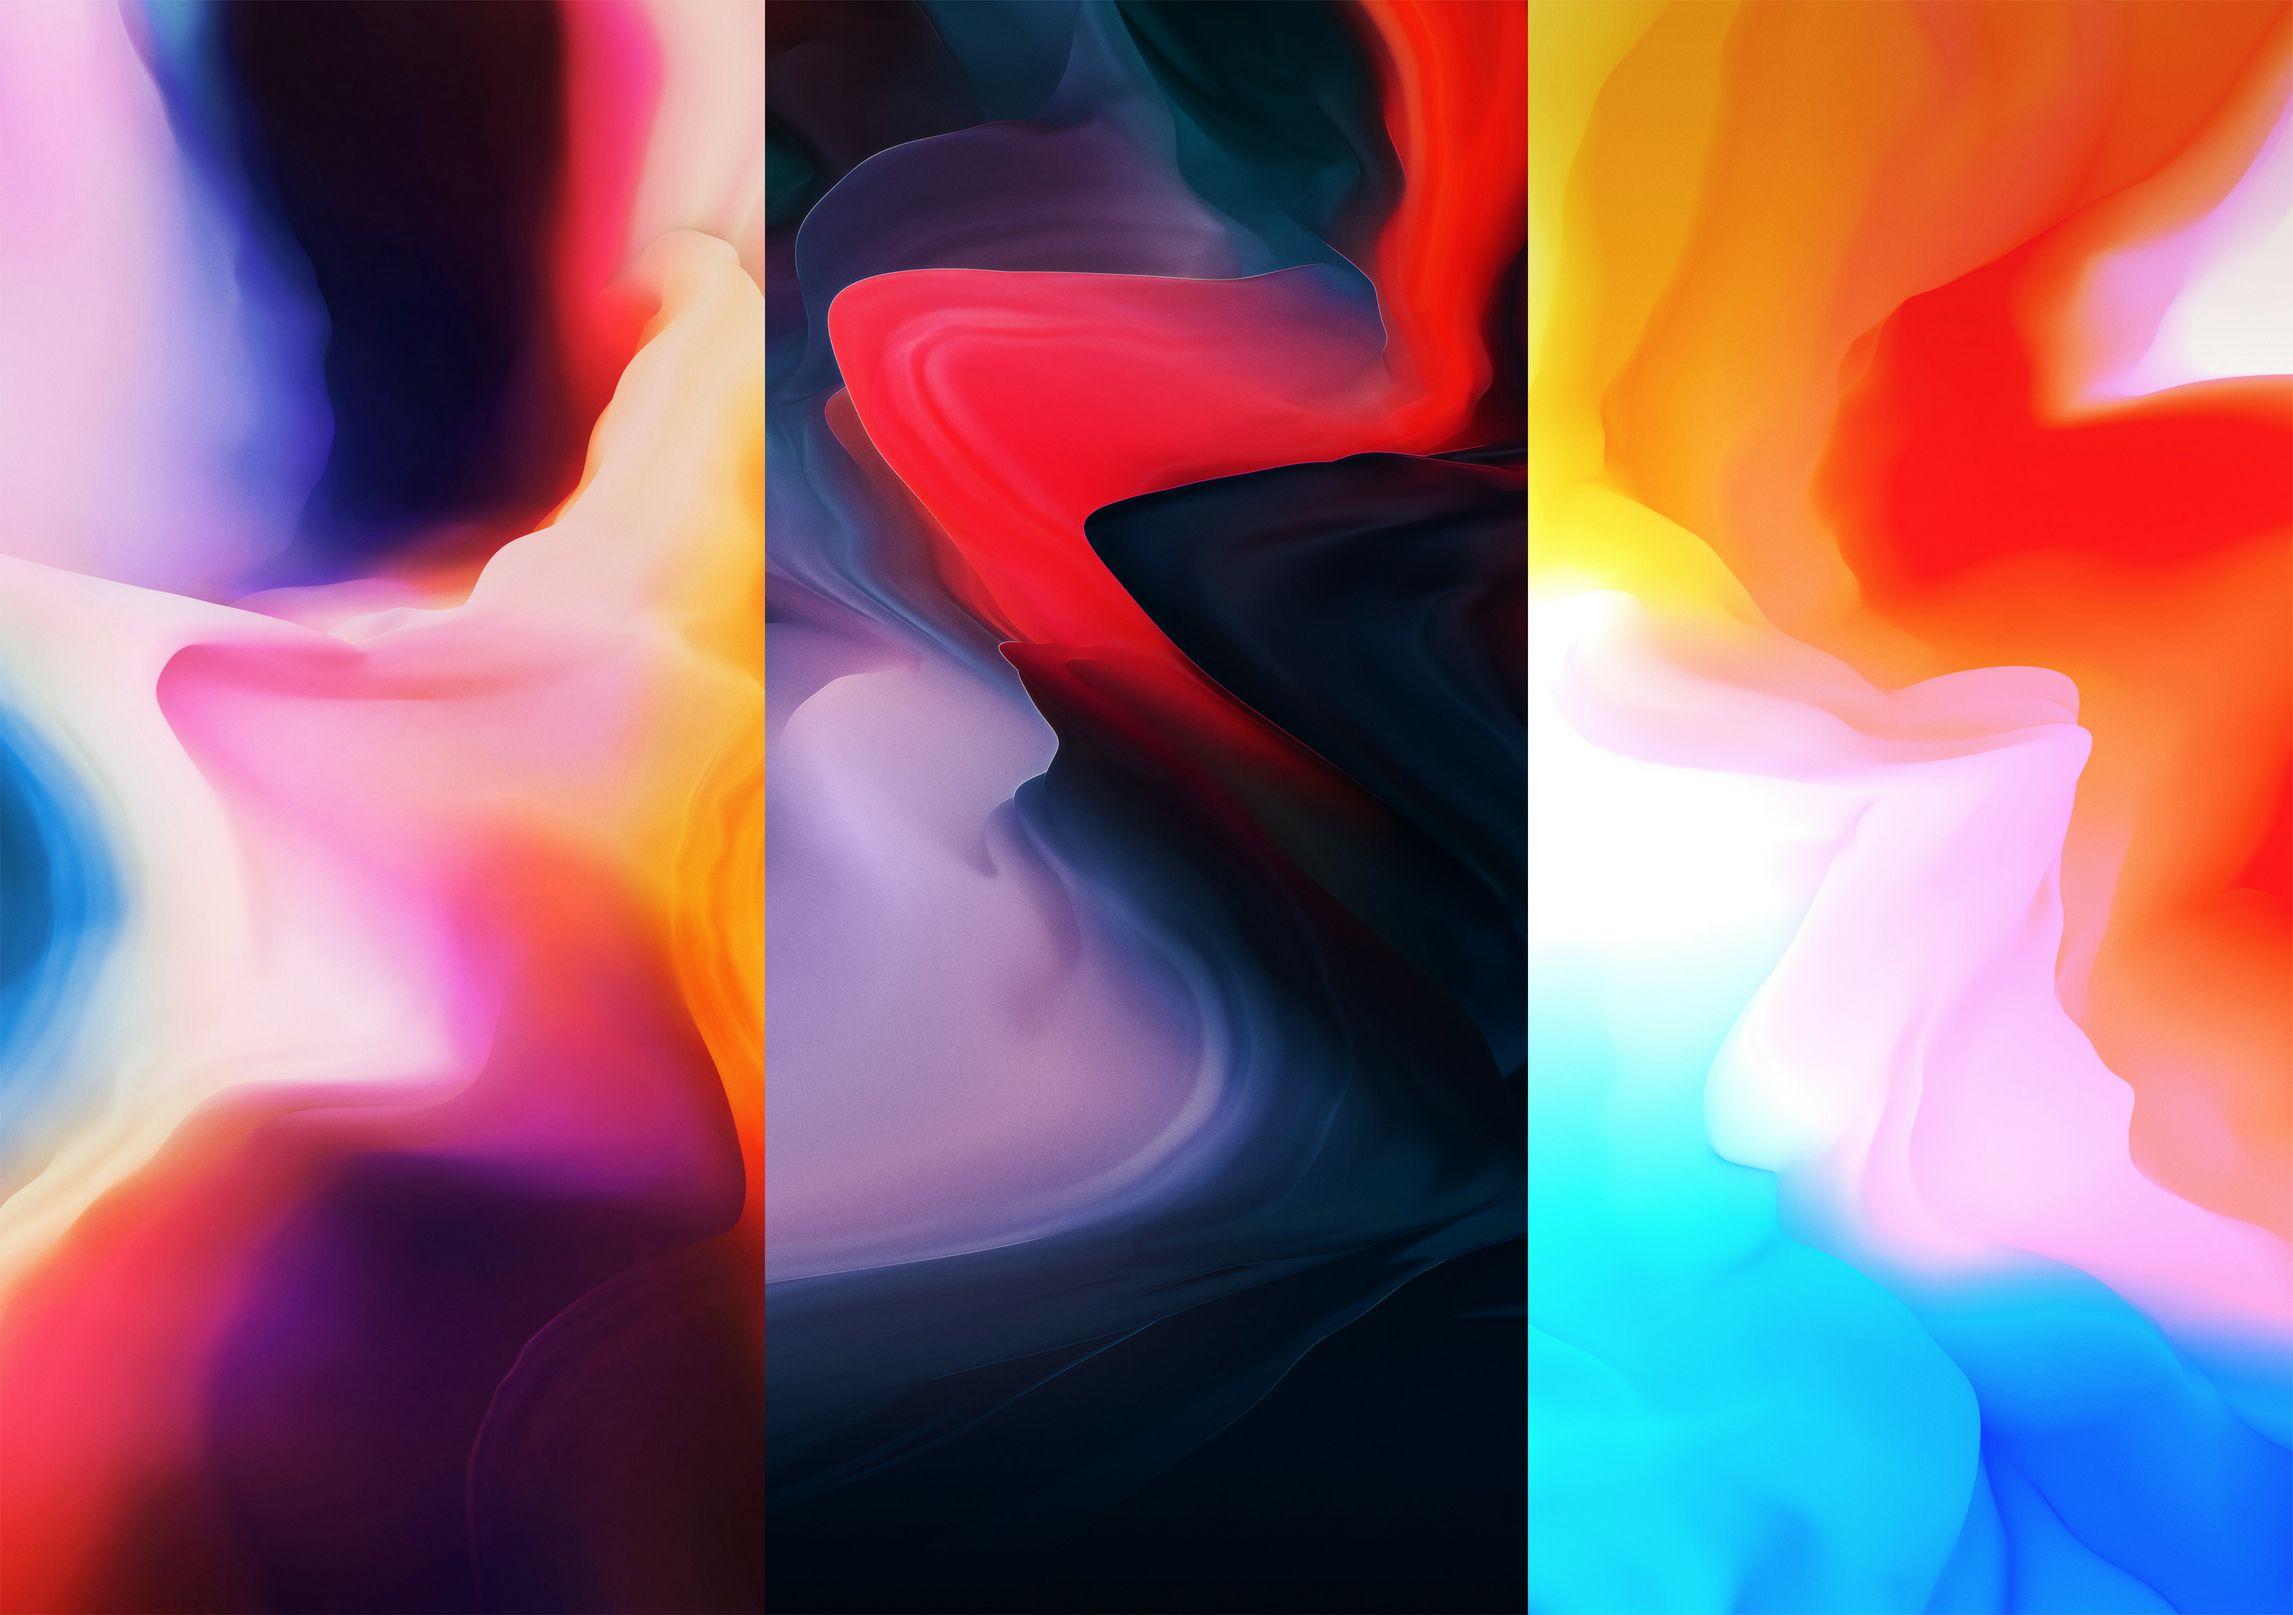 Snatch the OnePlus 6 wallpaper in 4K resolution right here